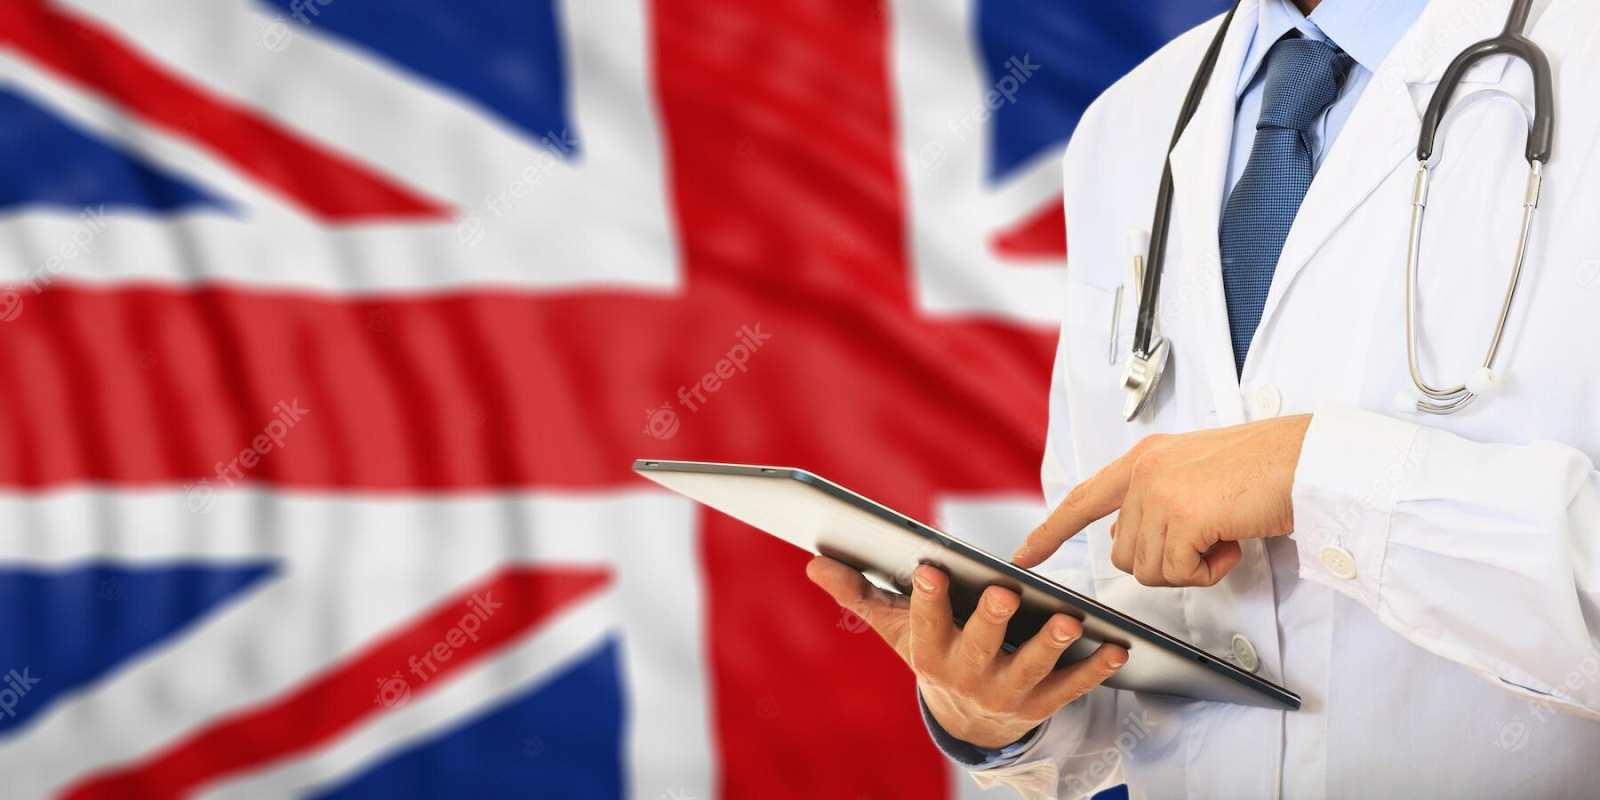 Malaysian medical student with a stethoscope stands near the UK flag, symbolising their aspiration to study medicine in the UK.